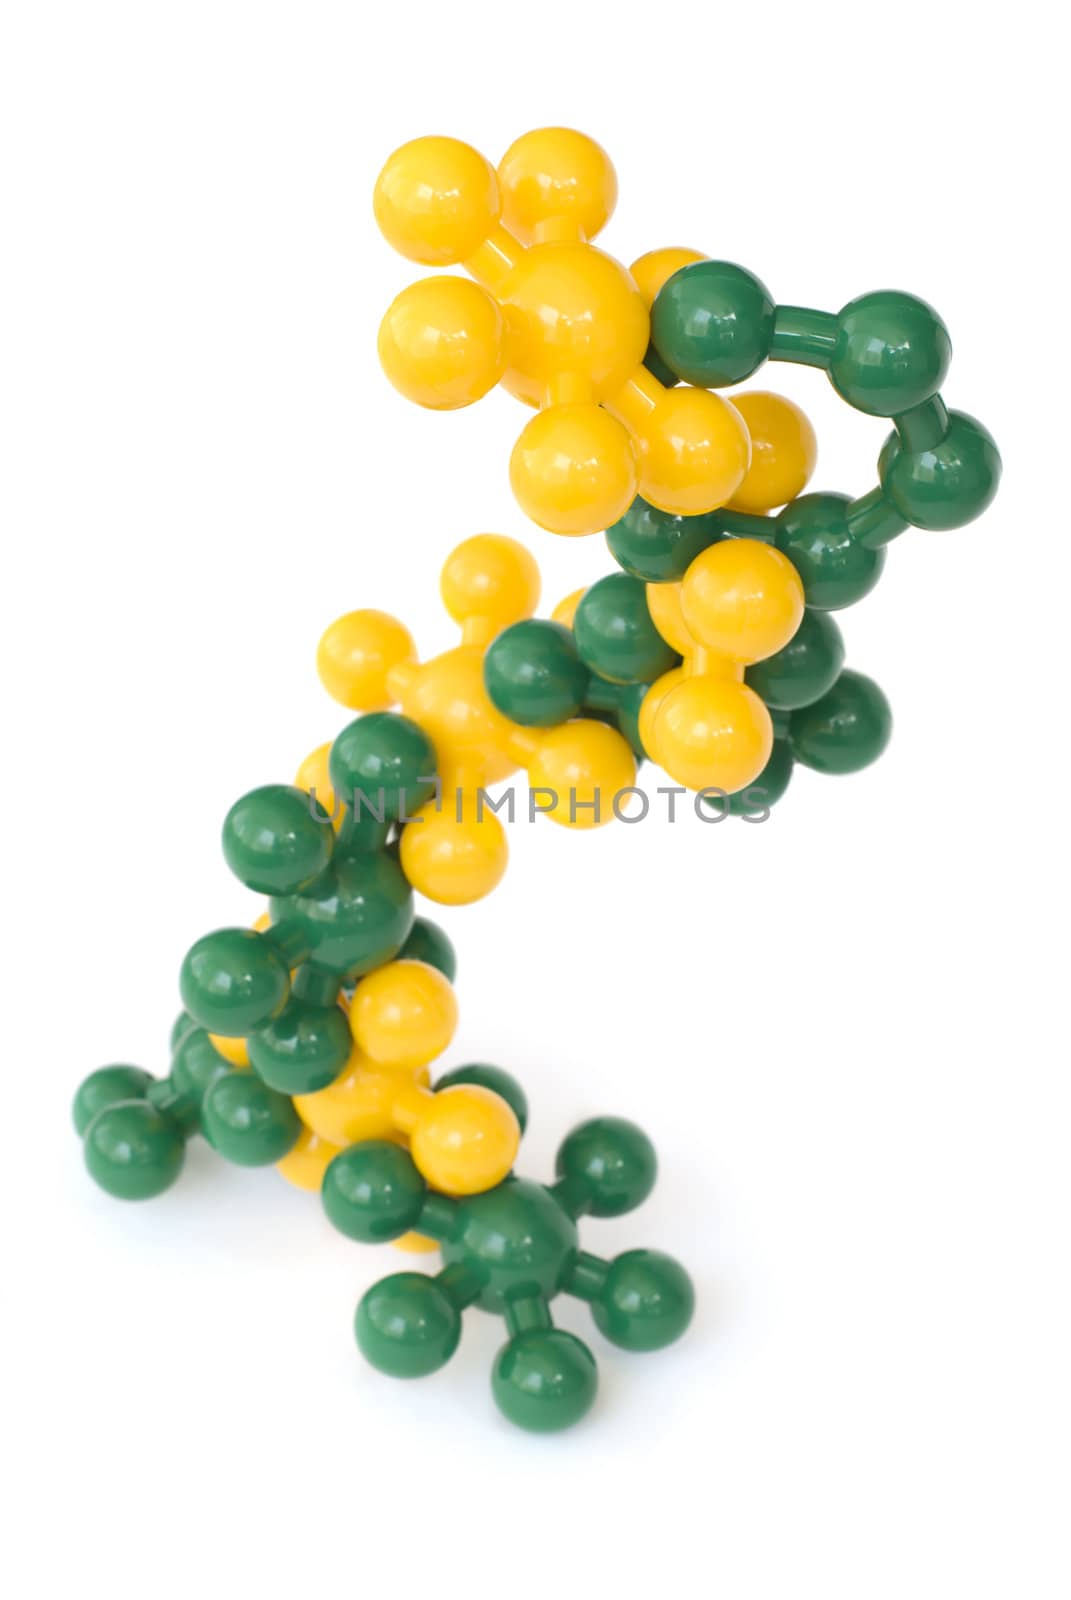 Creative colorful toy for building molecule and atom, isolated